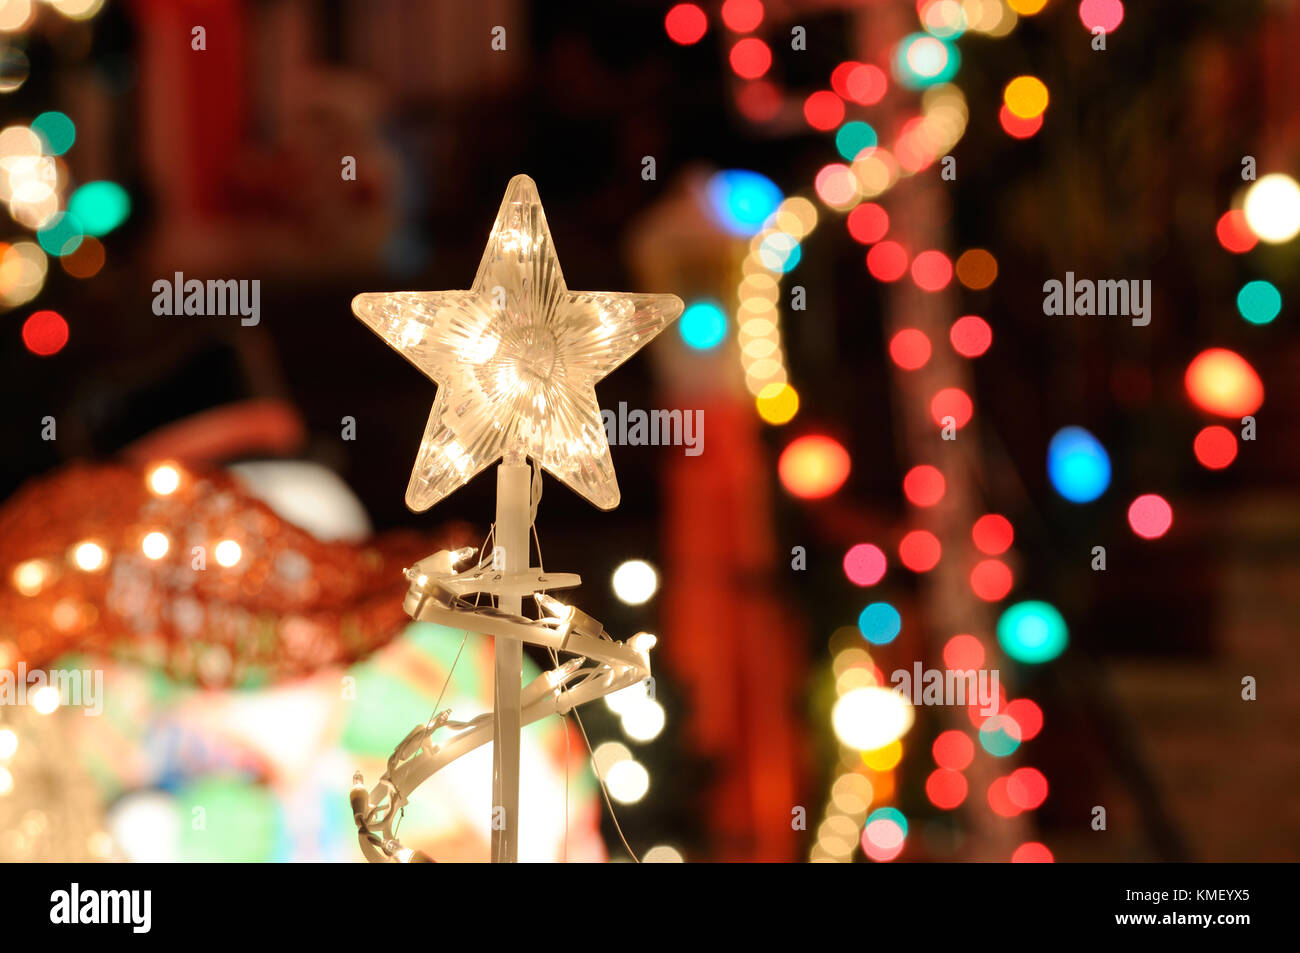 Christmas Lights Background. Nativity star, blurred lights and outdoor decorations Stock Photo